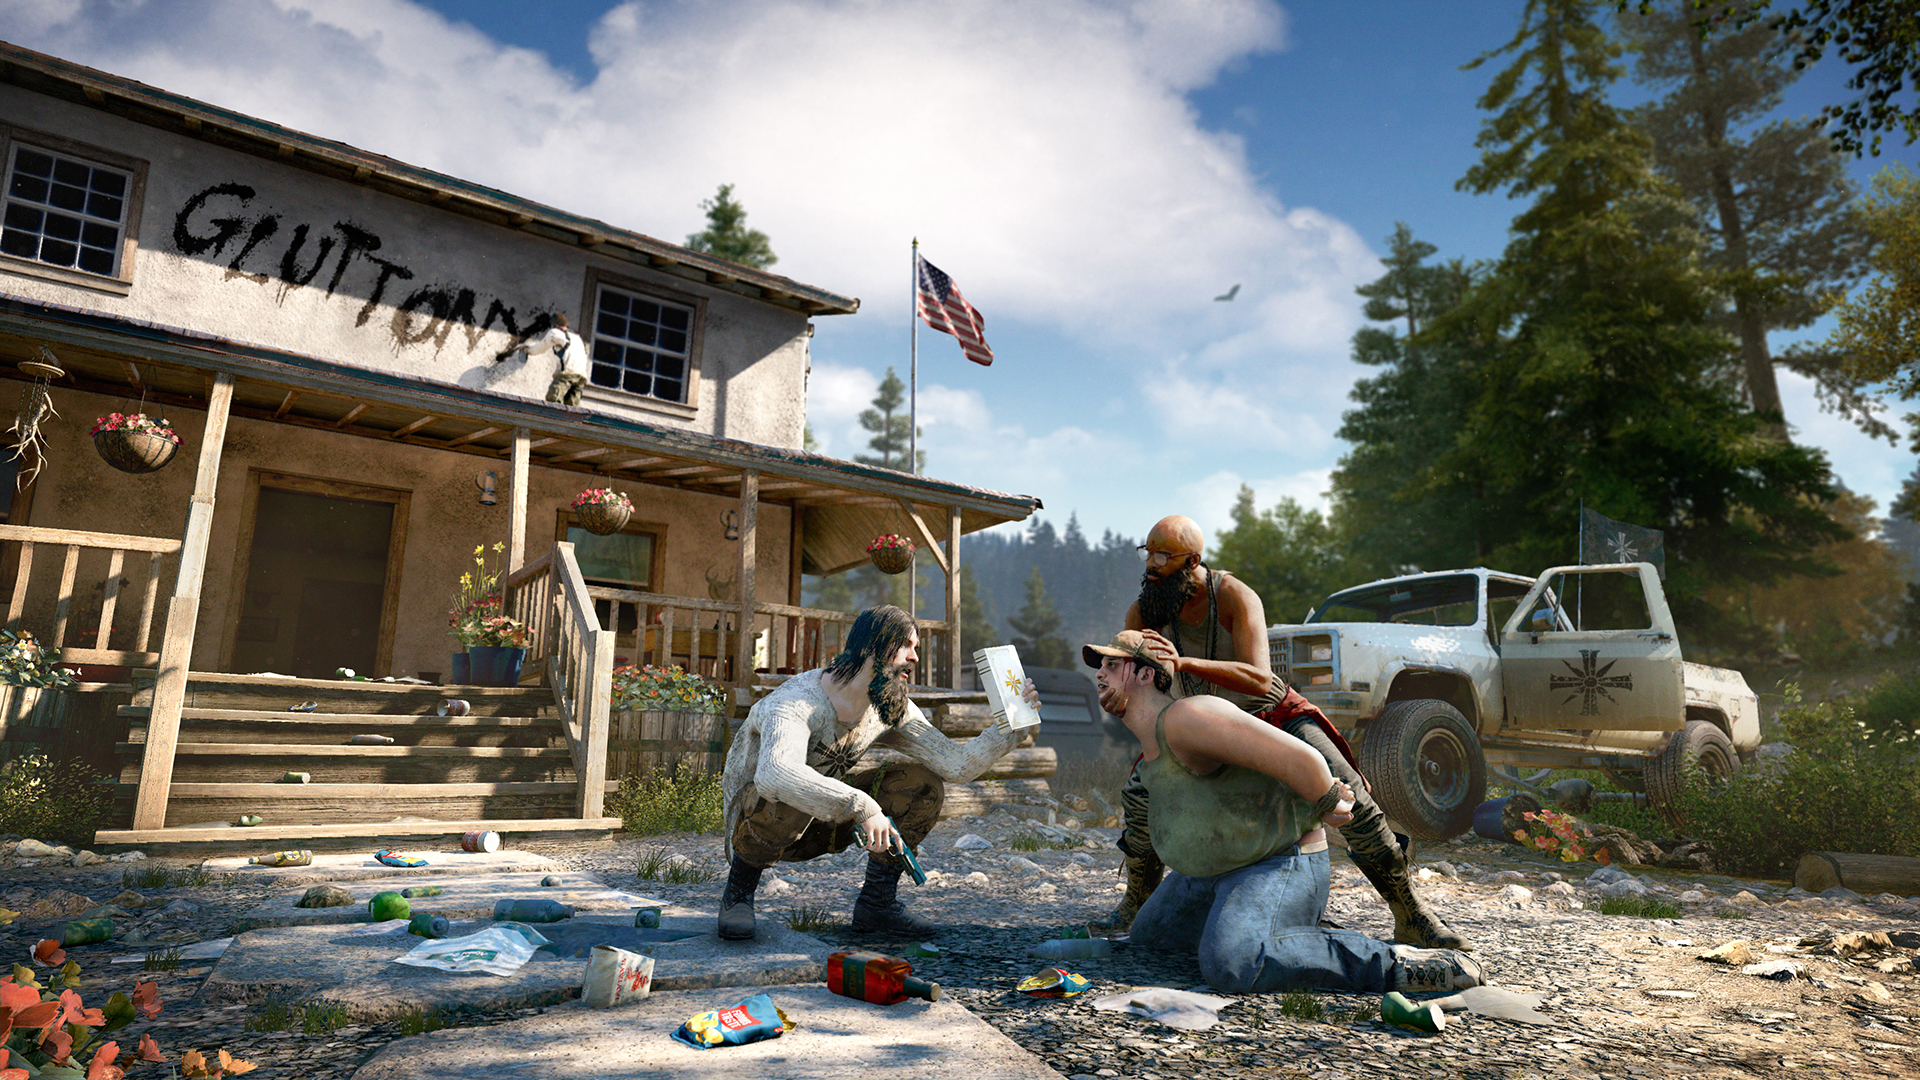 Can I Run Far Cry 5? Check the Far Cry 5 System Requirements